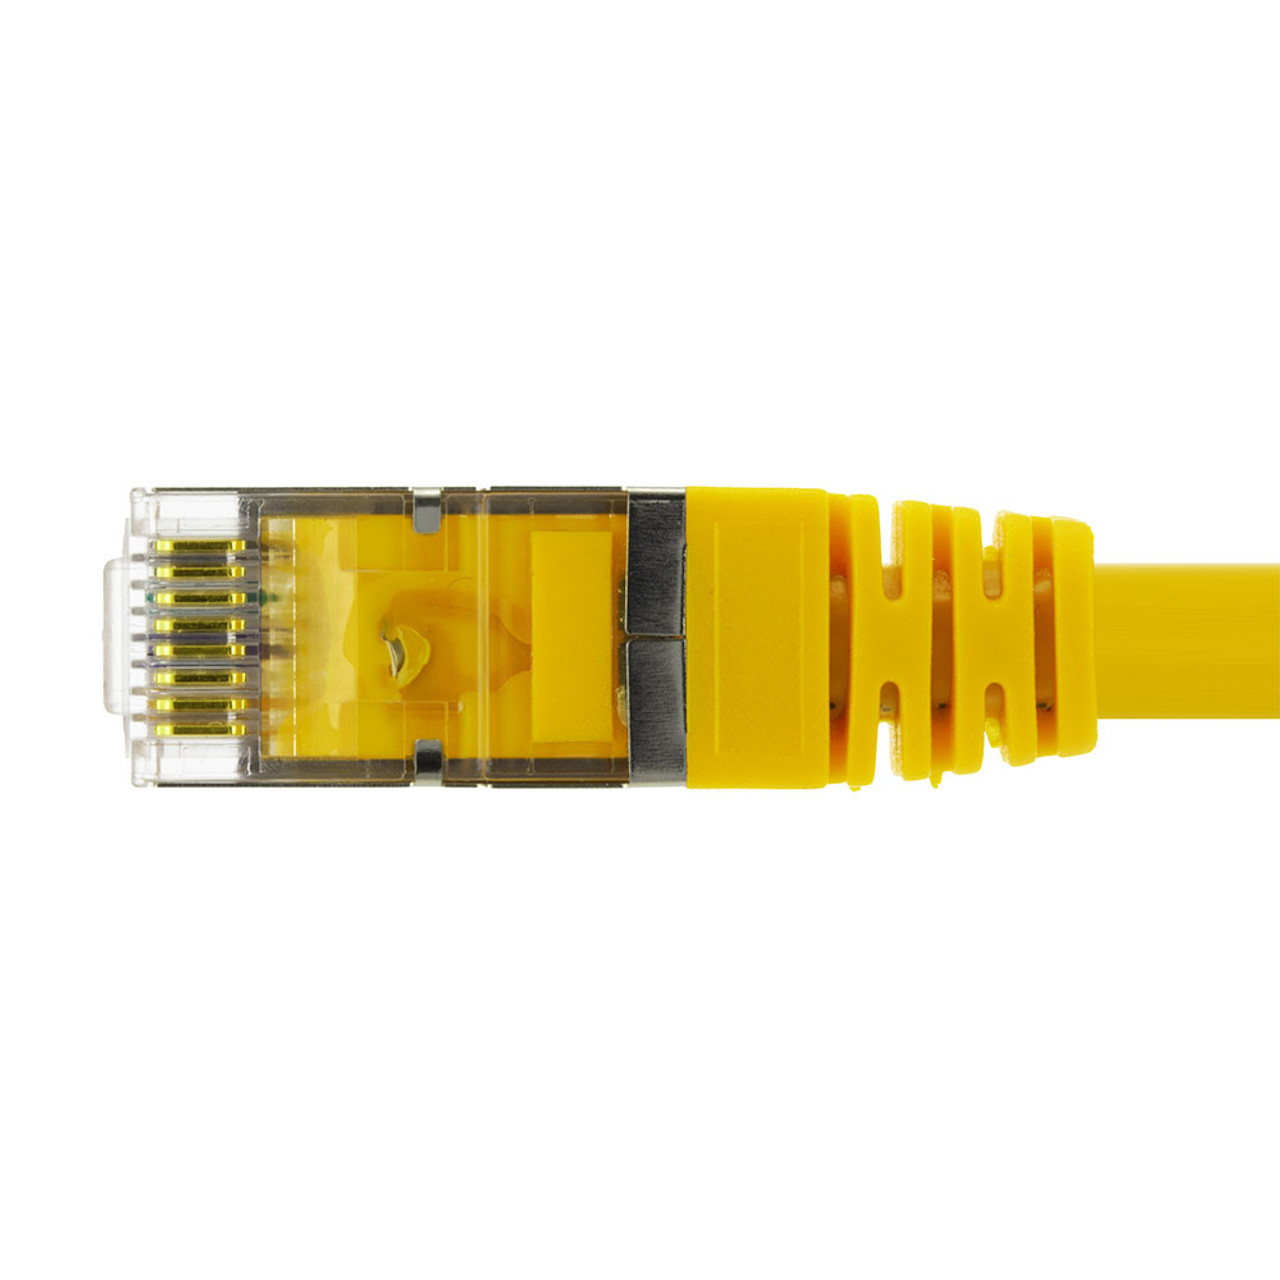 Ethernet Patch Cable CAT6, F/UTP, 26AWG,  5 Ft,  5 pack, Yellow